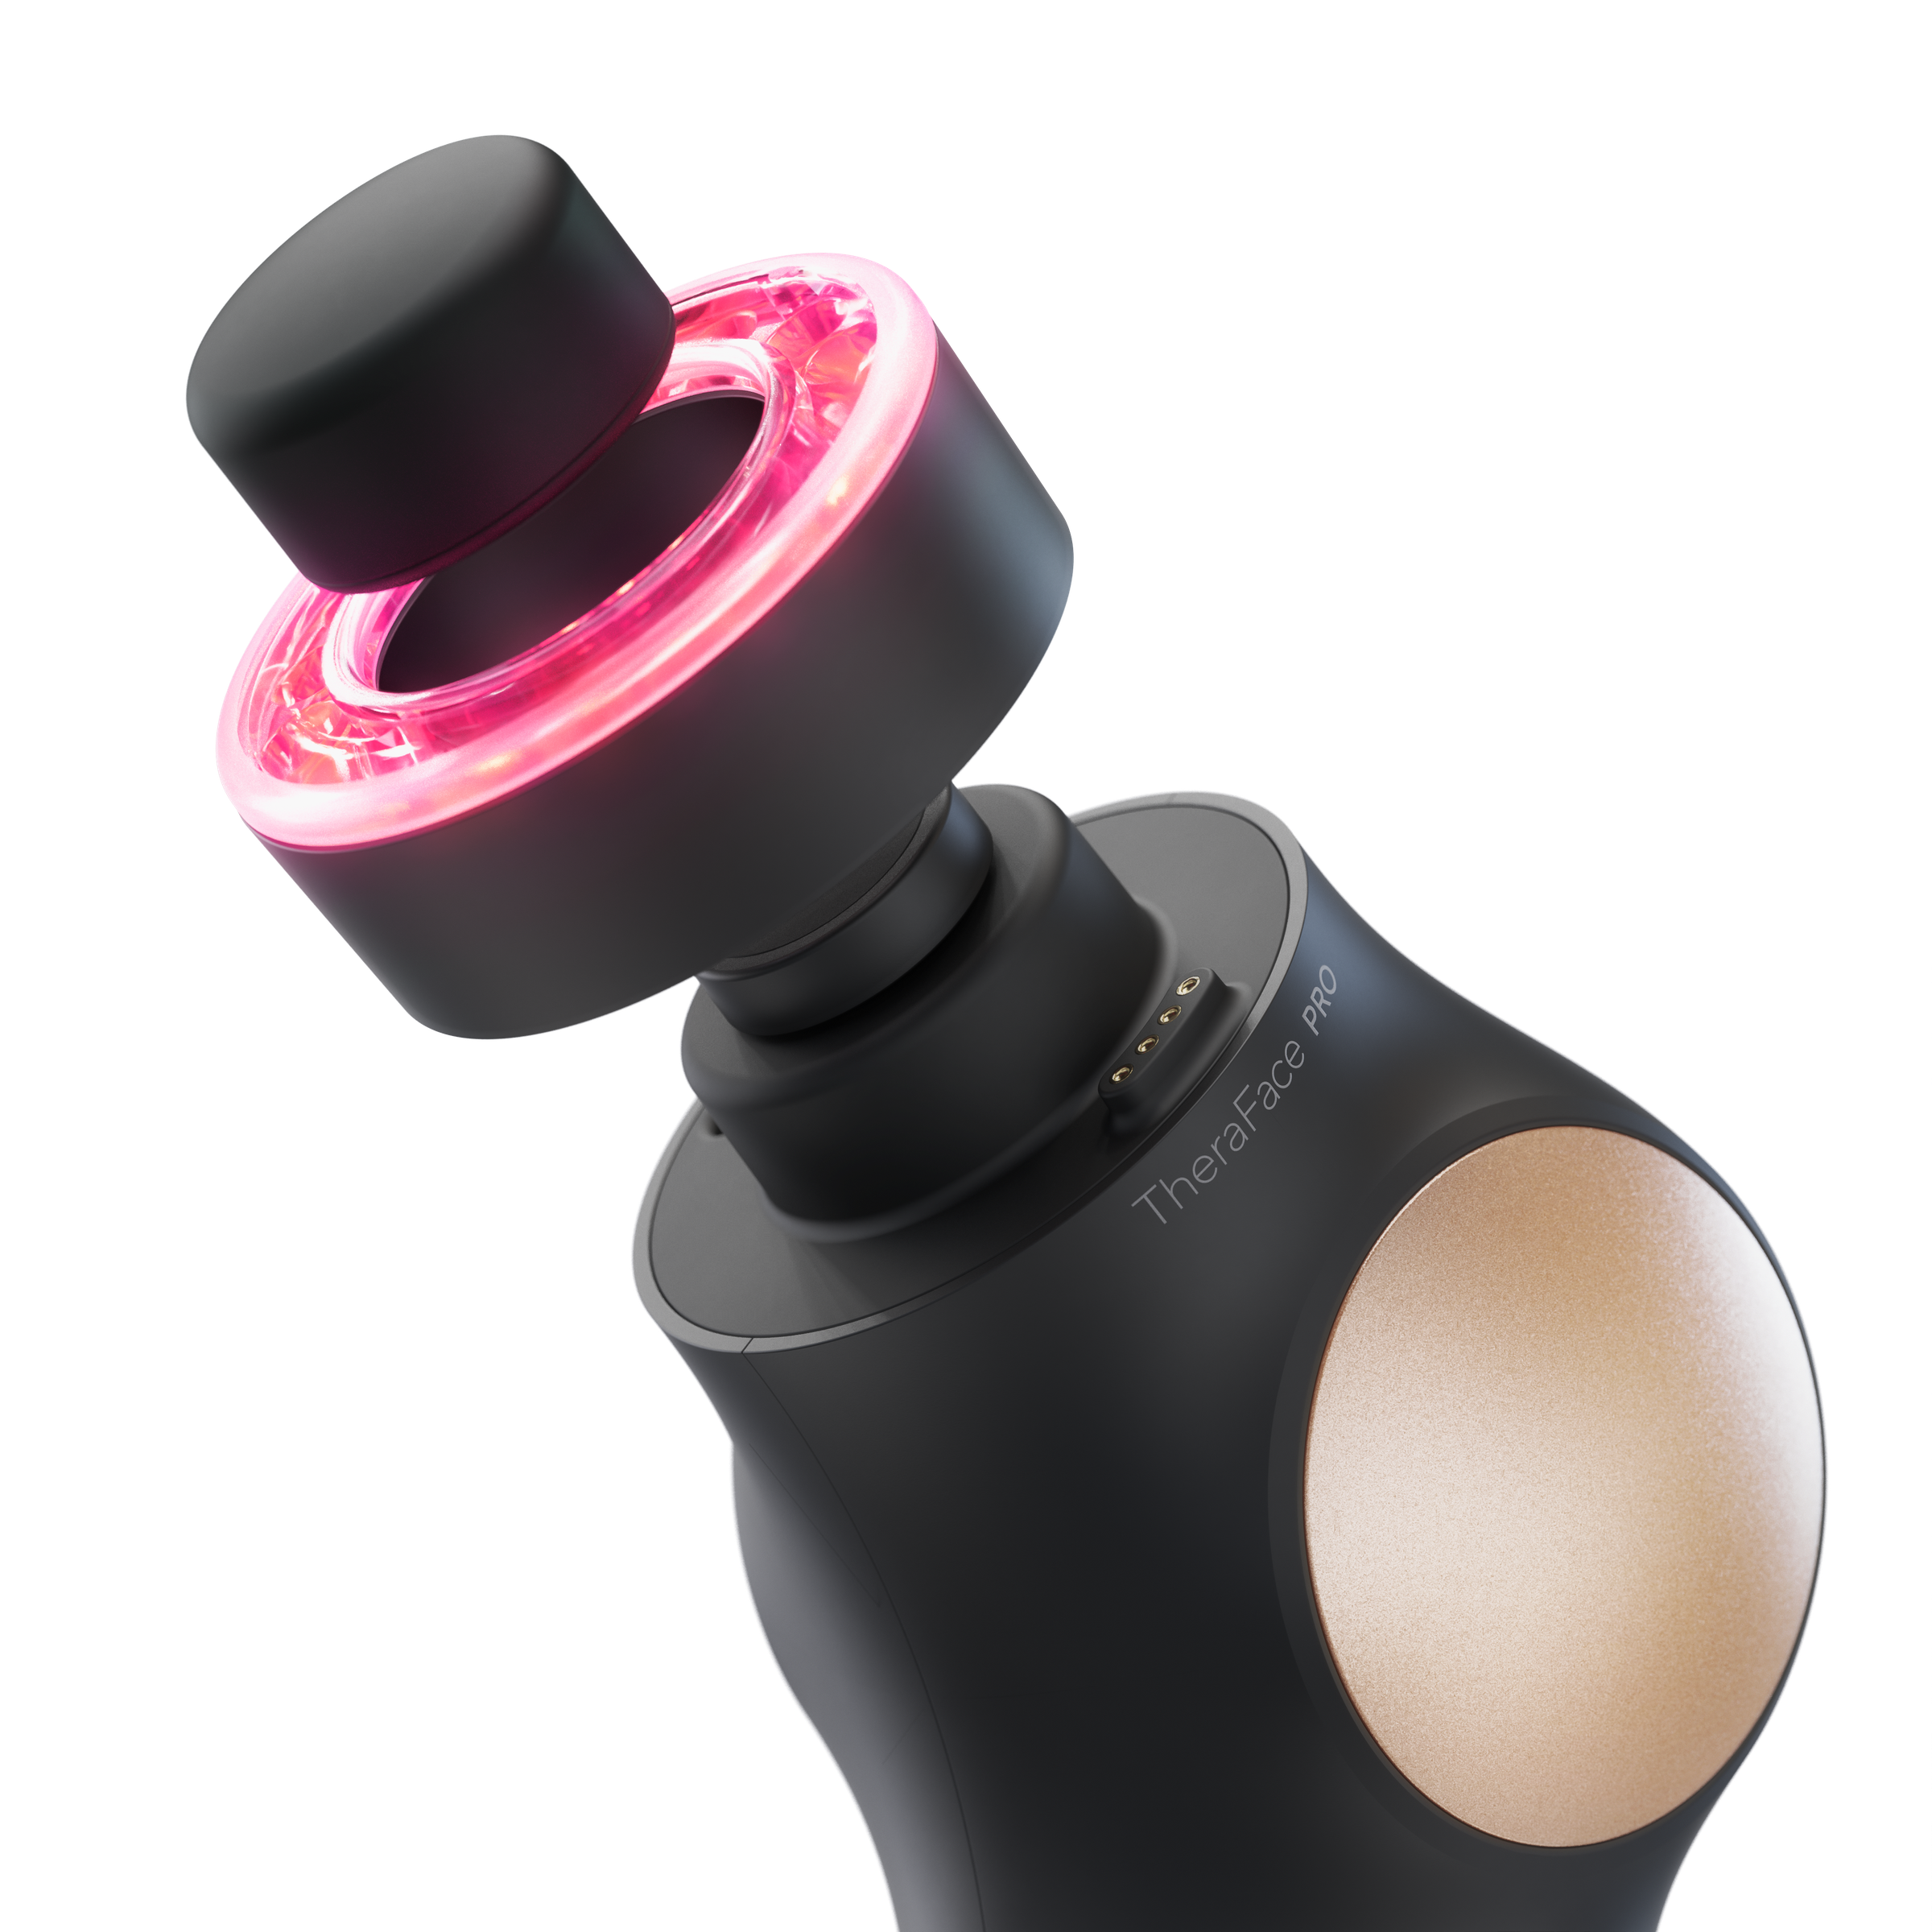 The TheraFace Pro acts as several skincare devices in one.